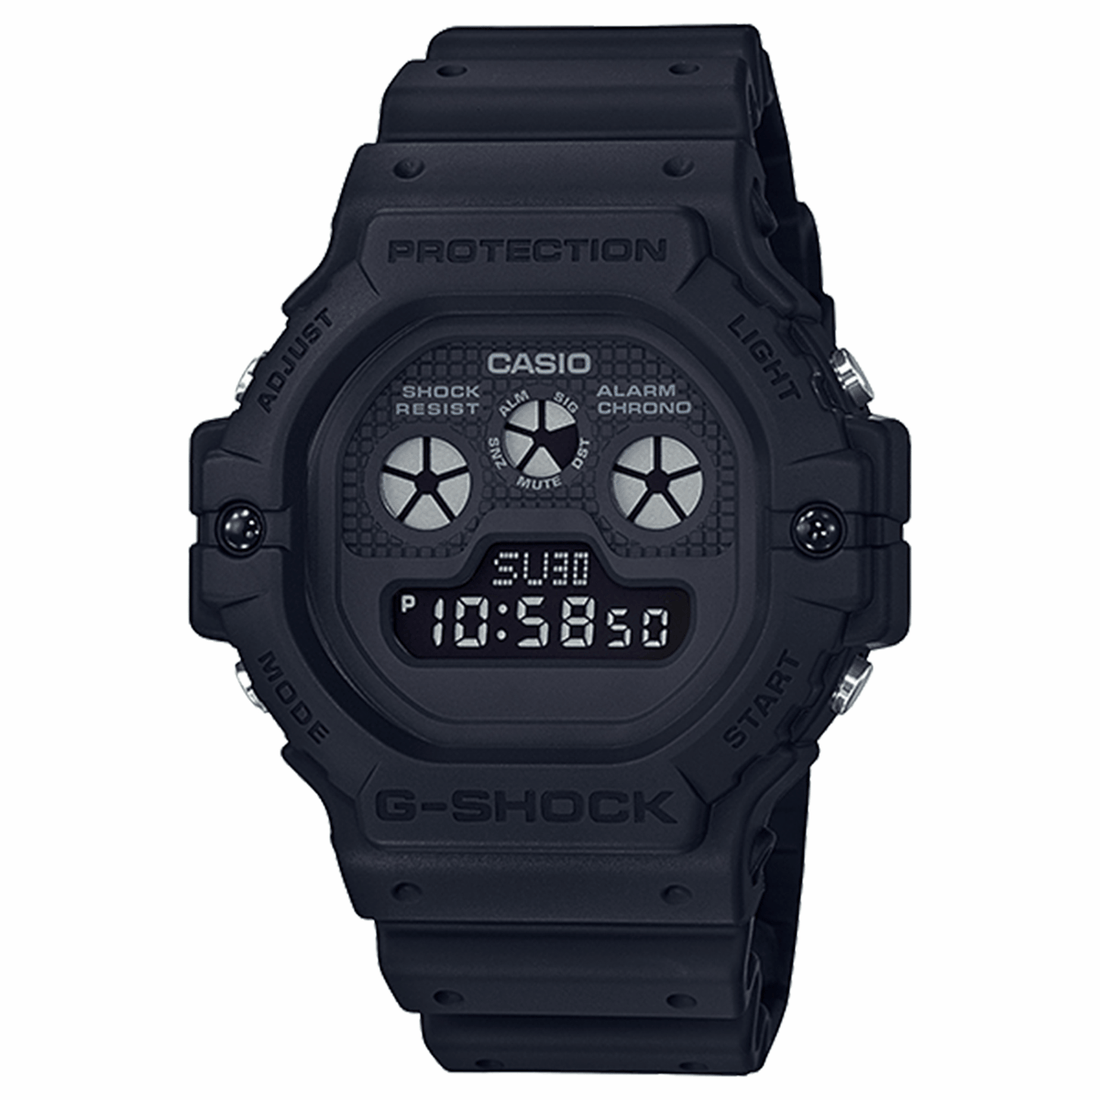 G-SHOCK - NEW DELIVERY